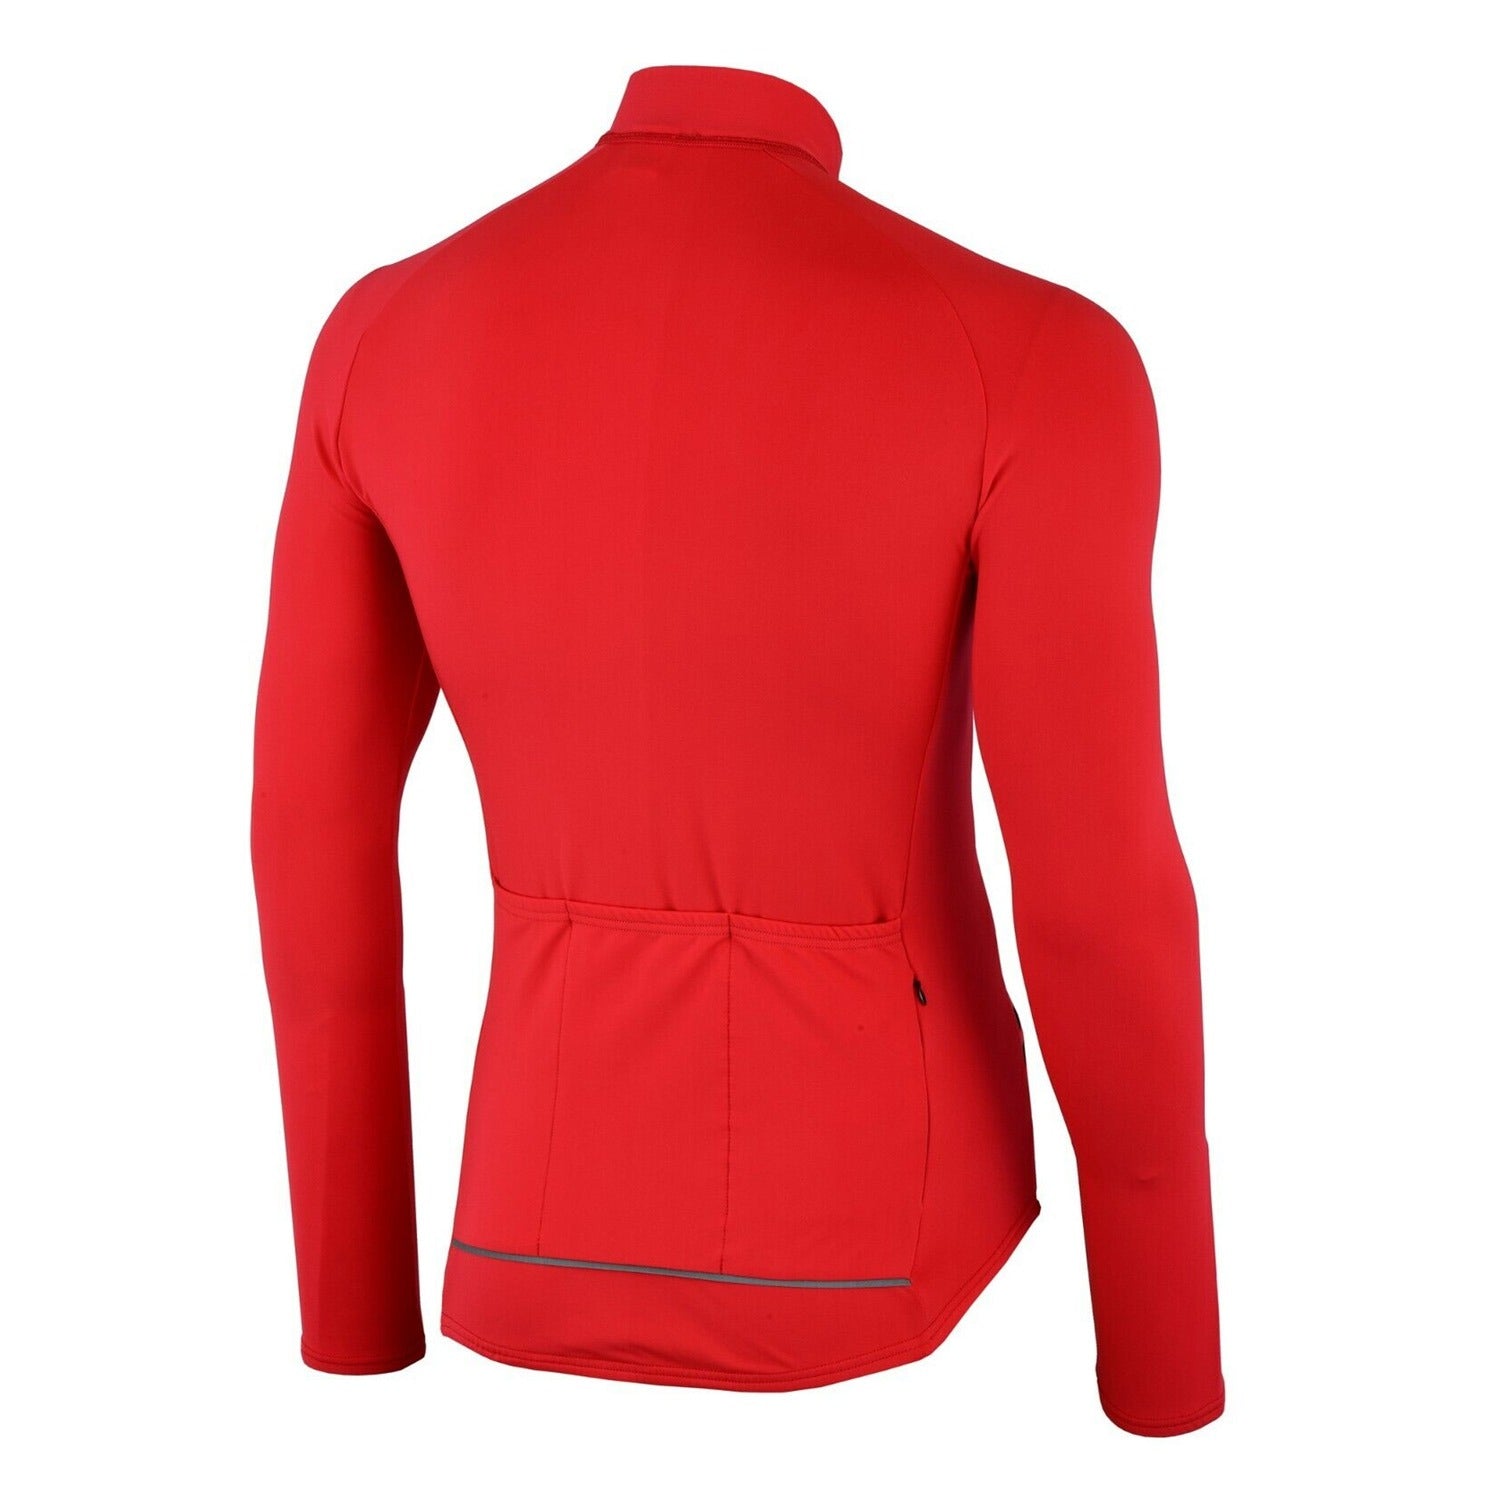 Cycling Jersey - Red